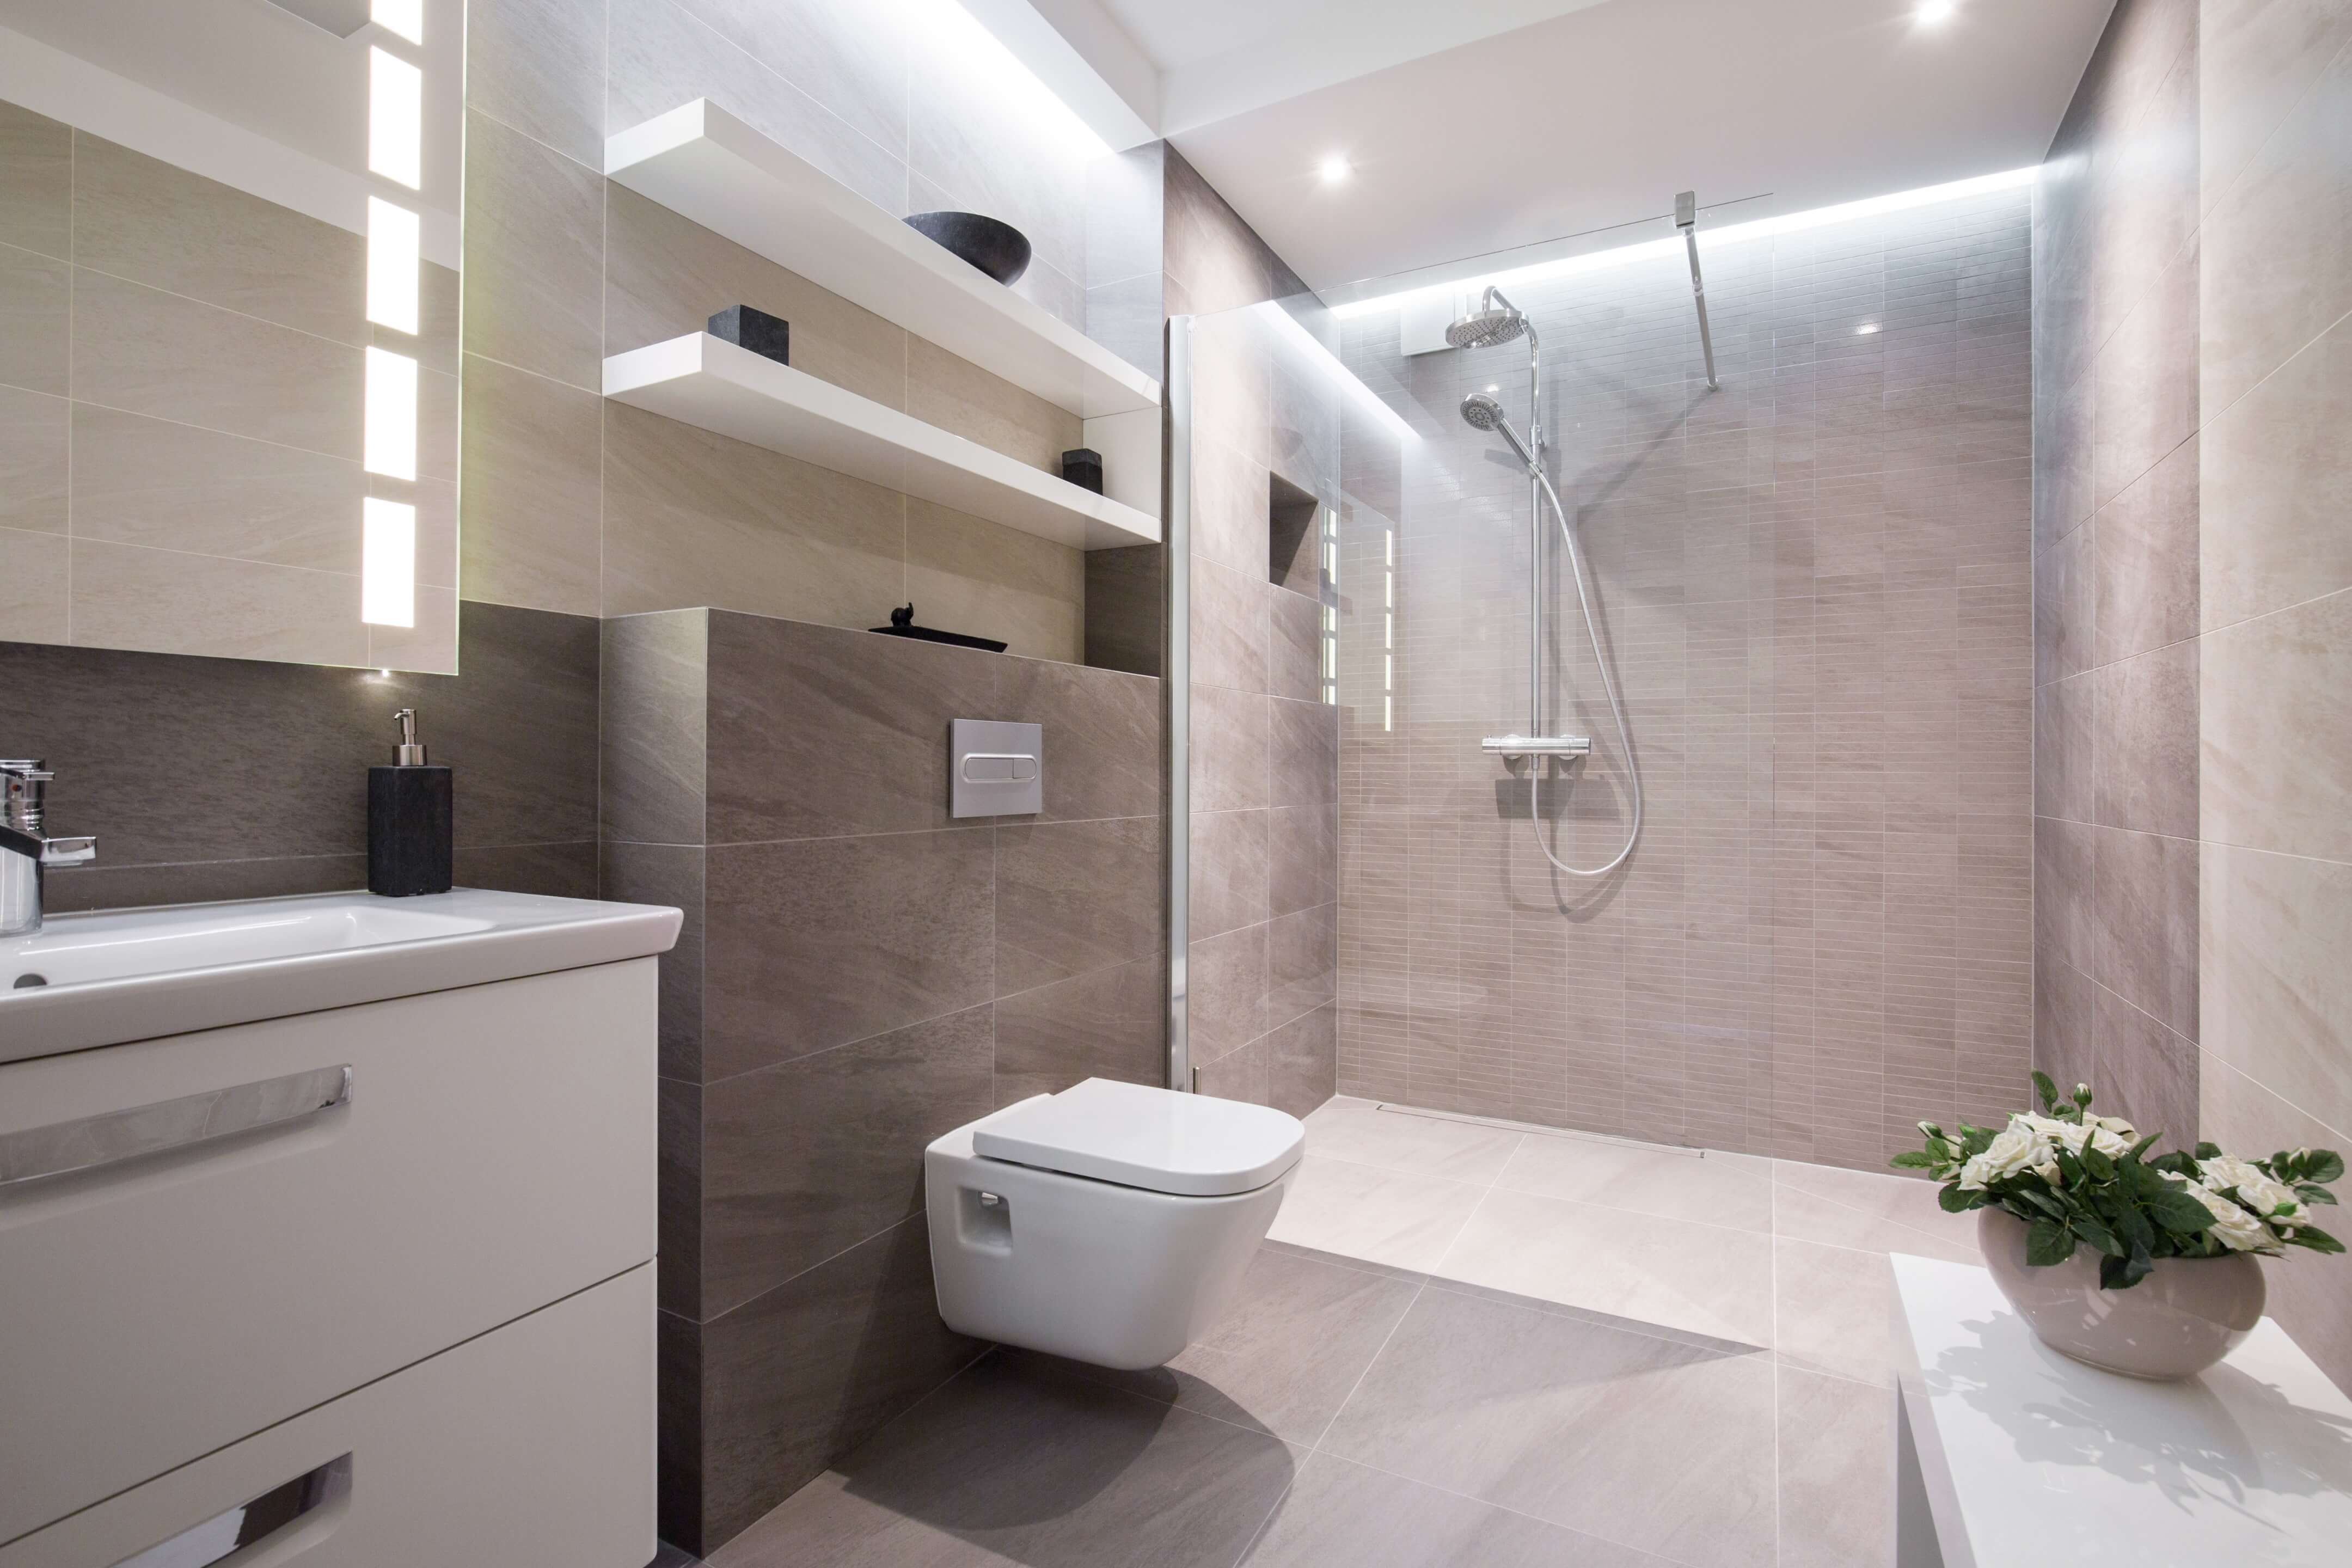 local bathroom fitters west dulwich